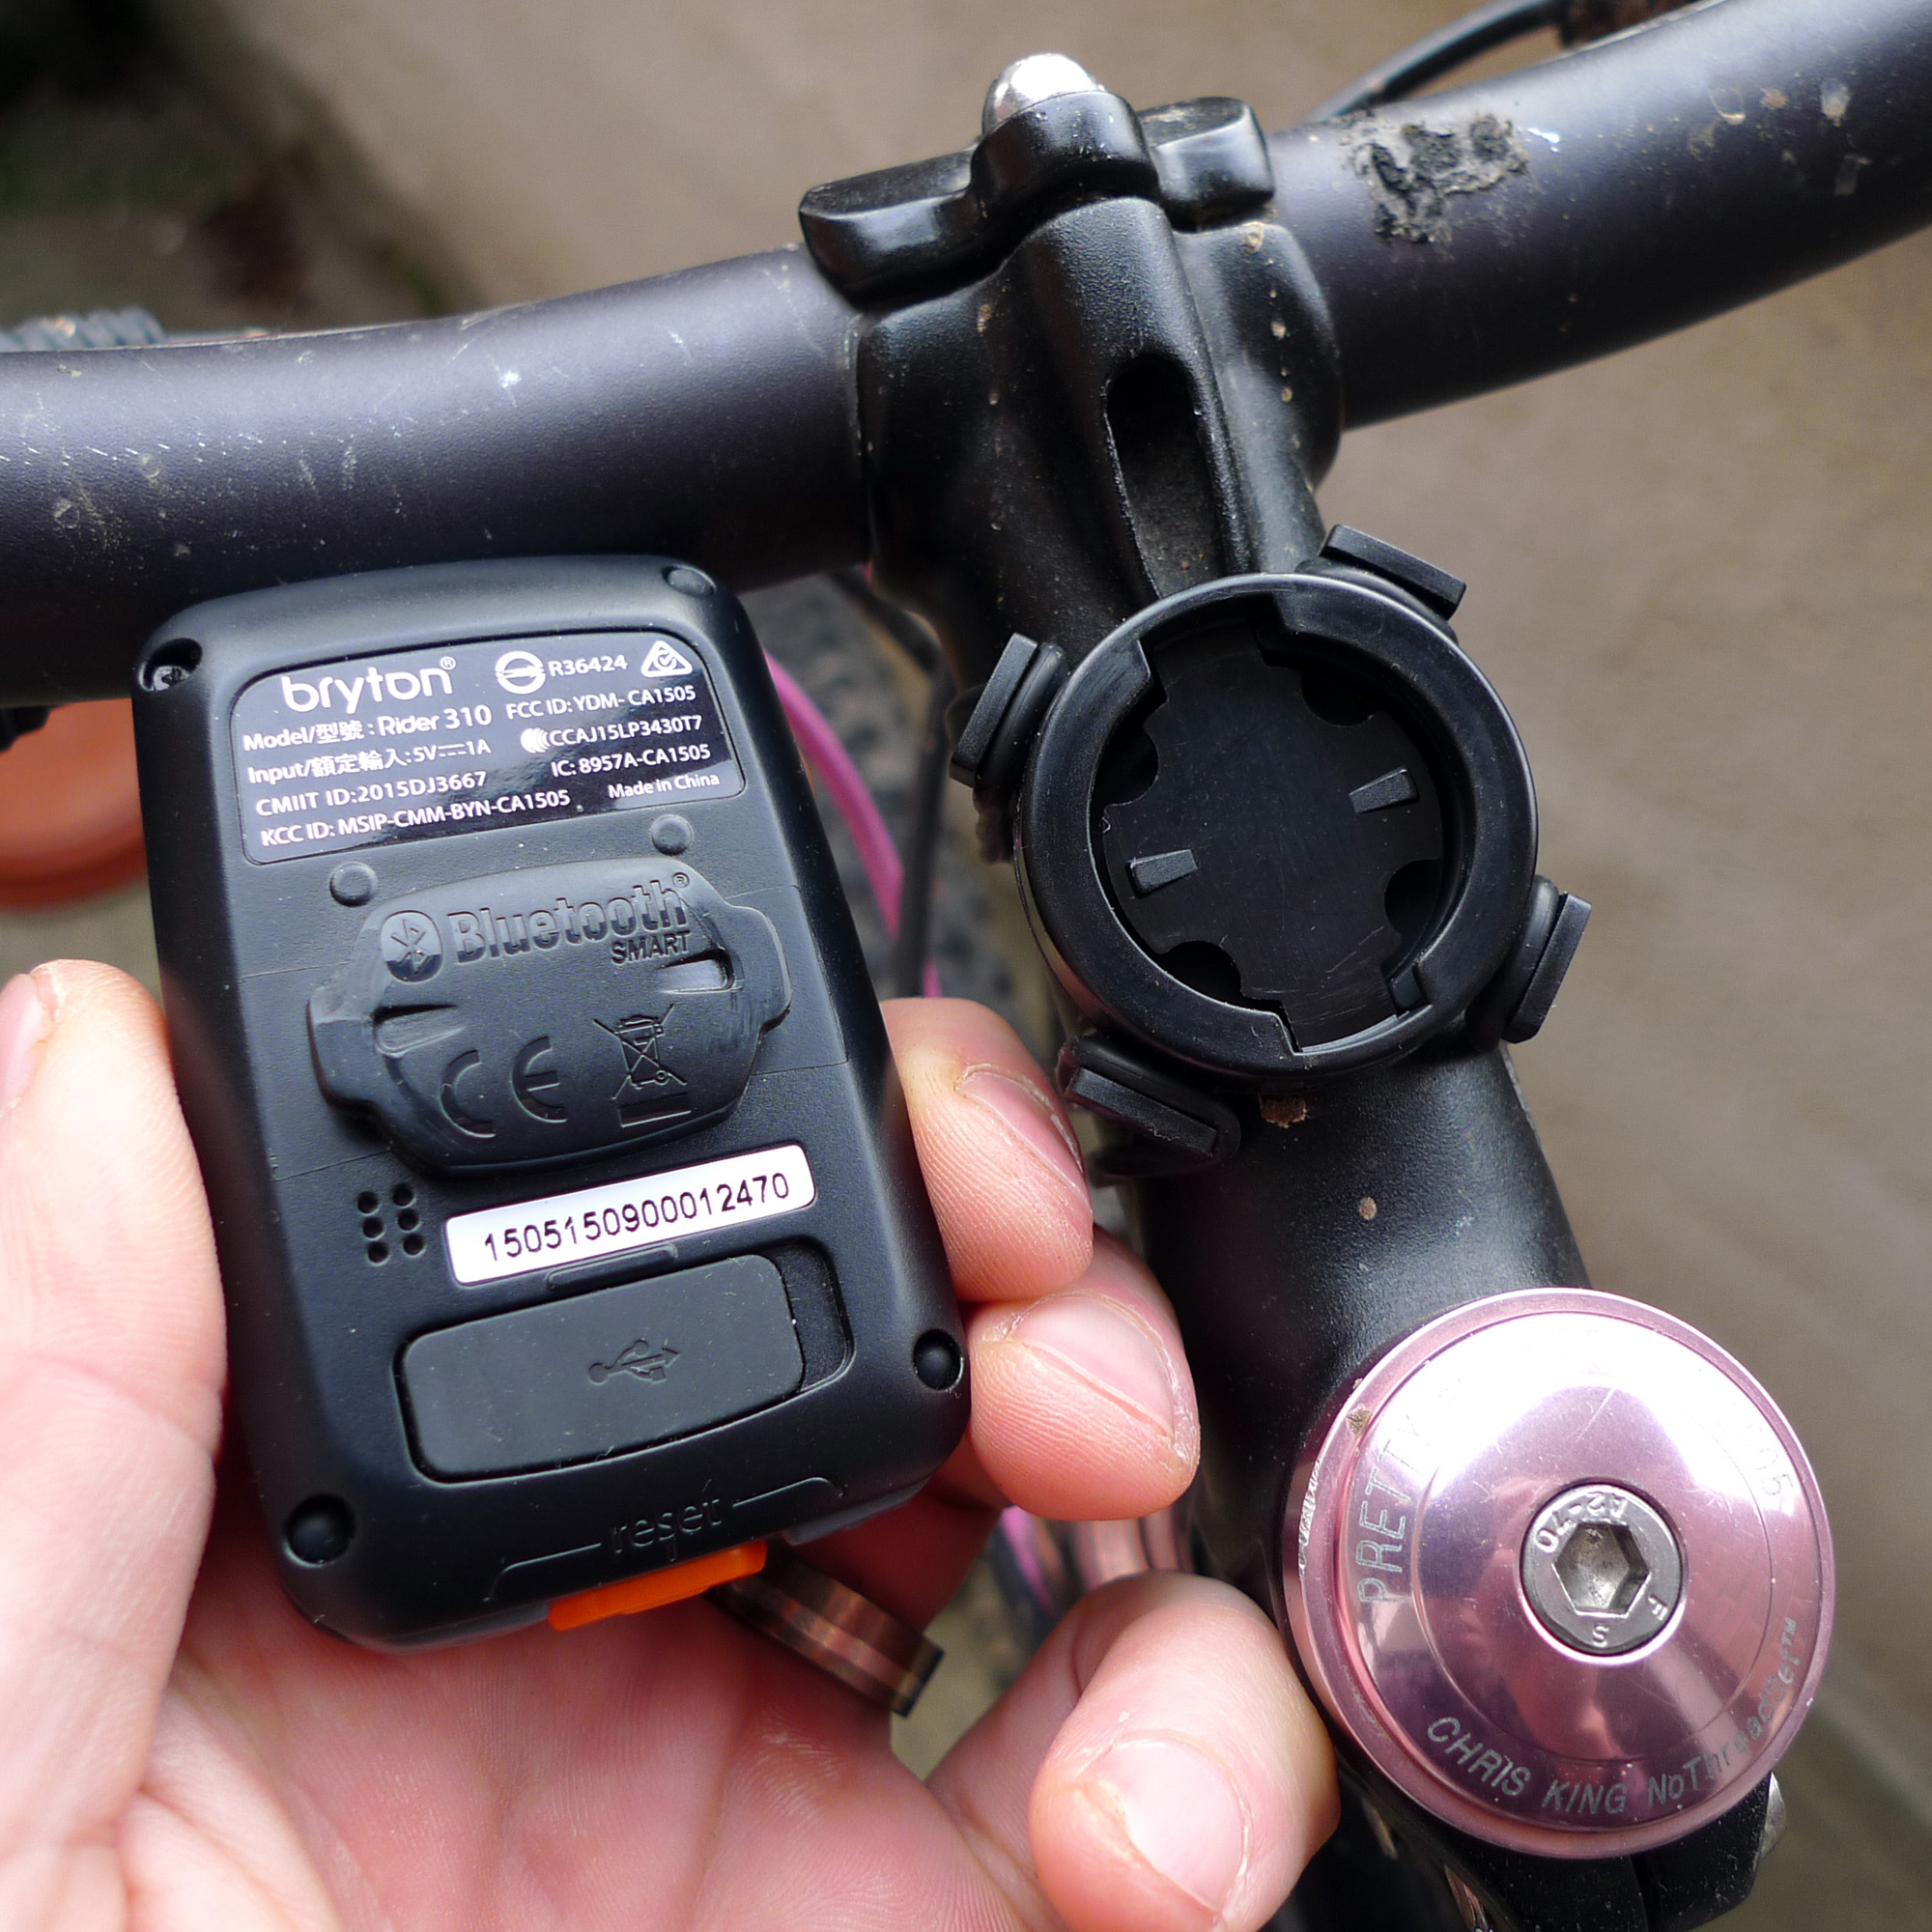 Discurso sin embargo Illinois Review: Bryton Rider 310 affordable GPS tracking cycle computer - Bikerumor